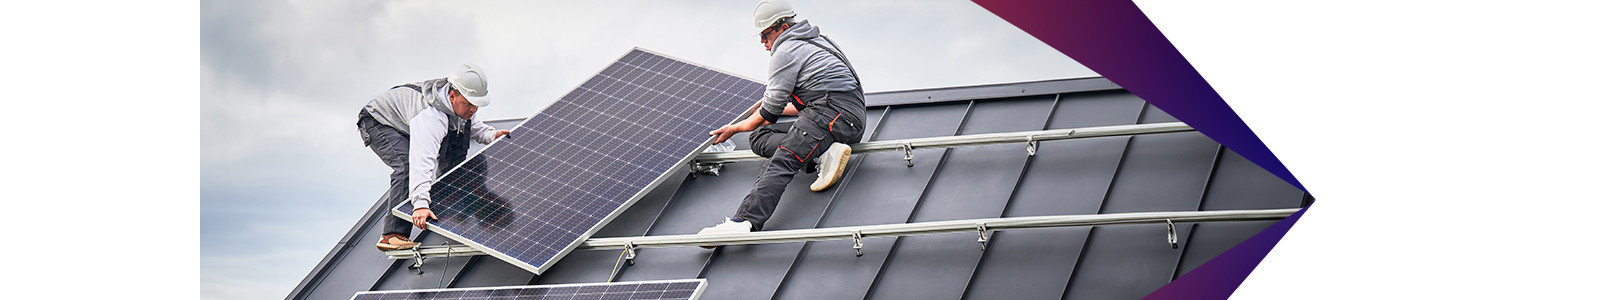 Two person fixing solar pannel